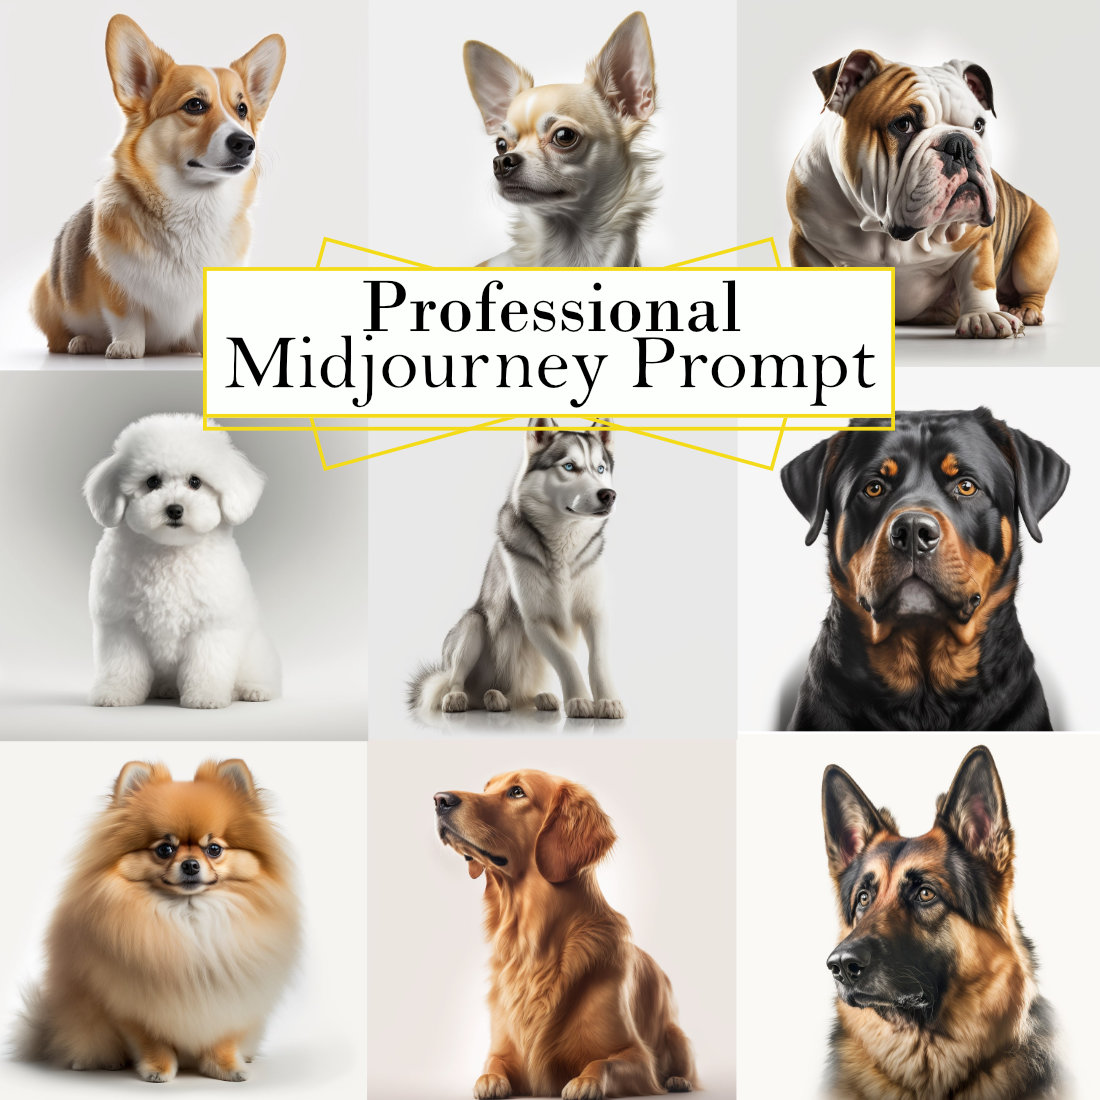 Different Dog Breeds Midjourney Prompt cover image.